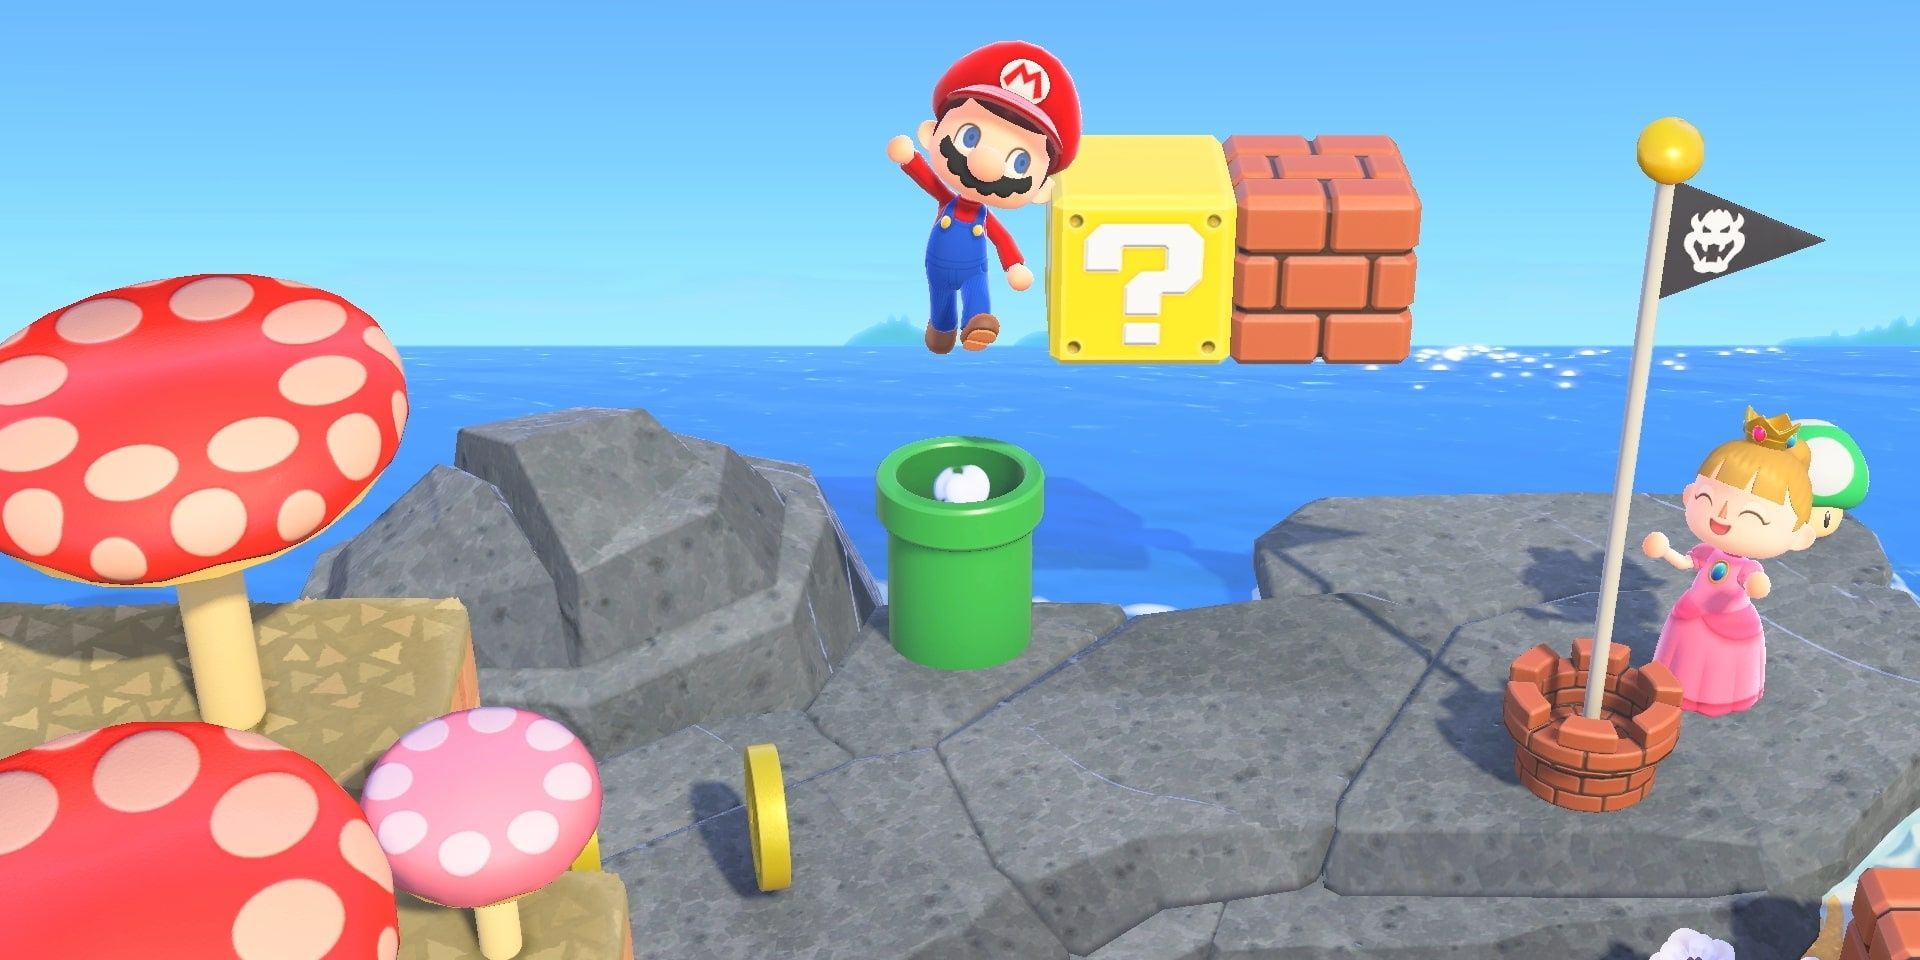 A player dressed as Mario popping out of the pipe in Animal Crossing New Horizons